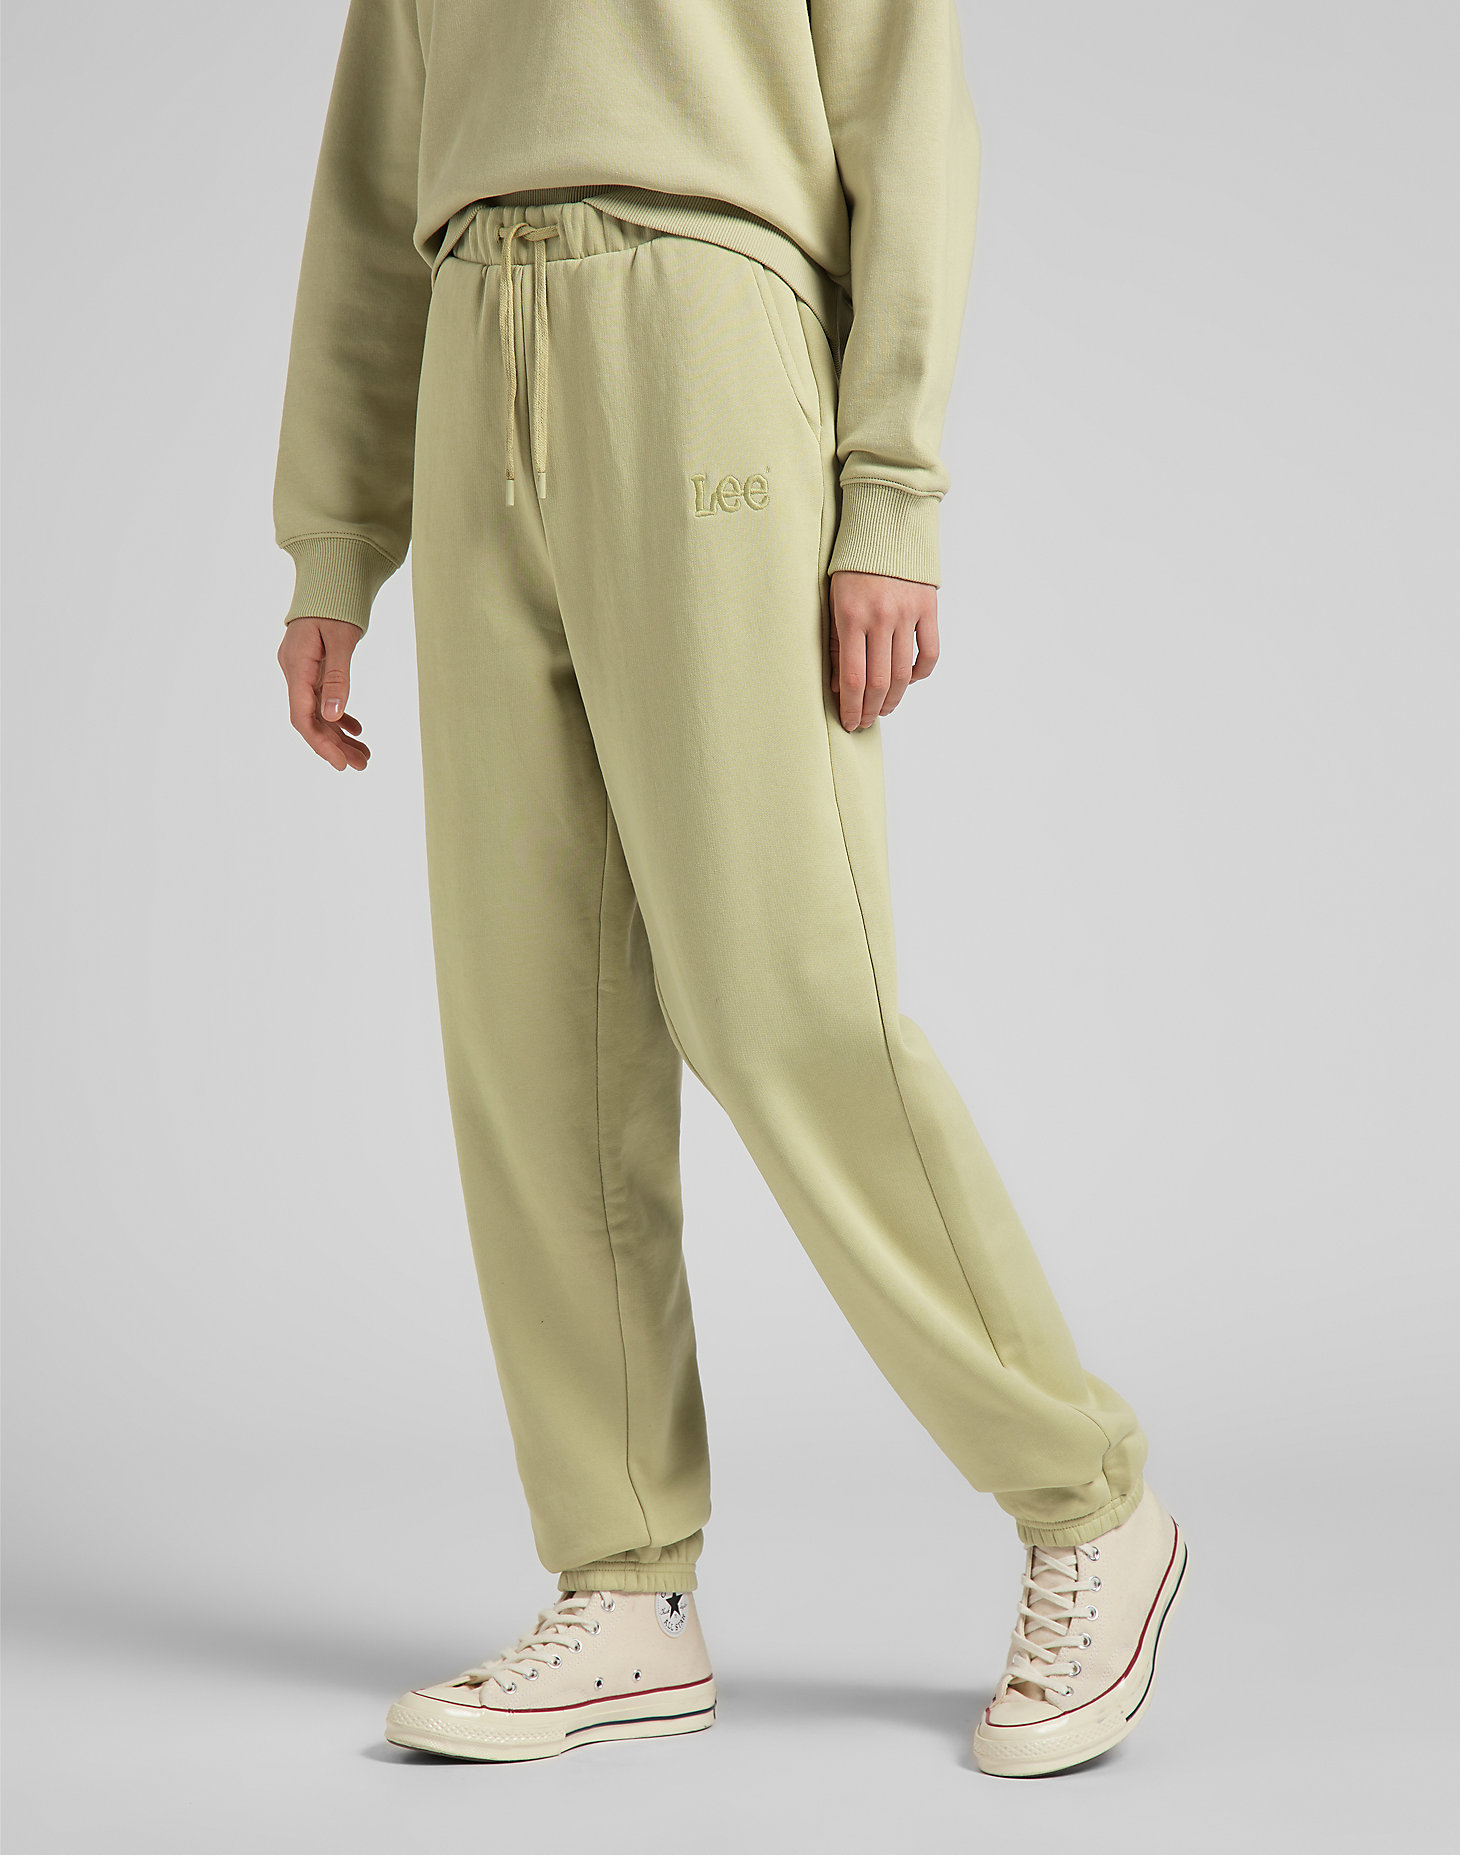 Relaxed Sweatpants in Pale Khaki alternative view 2